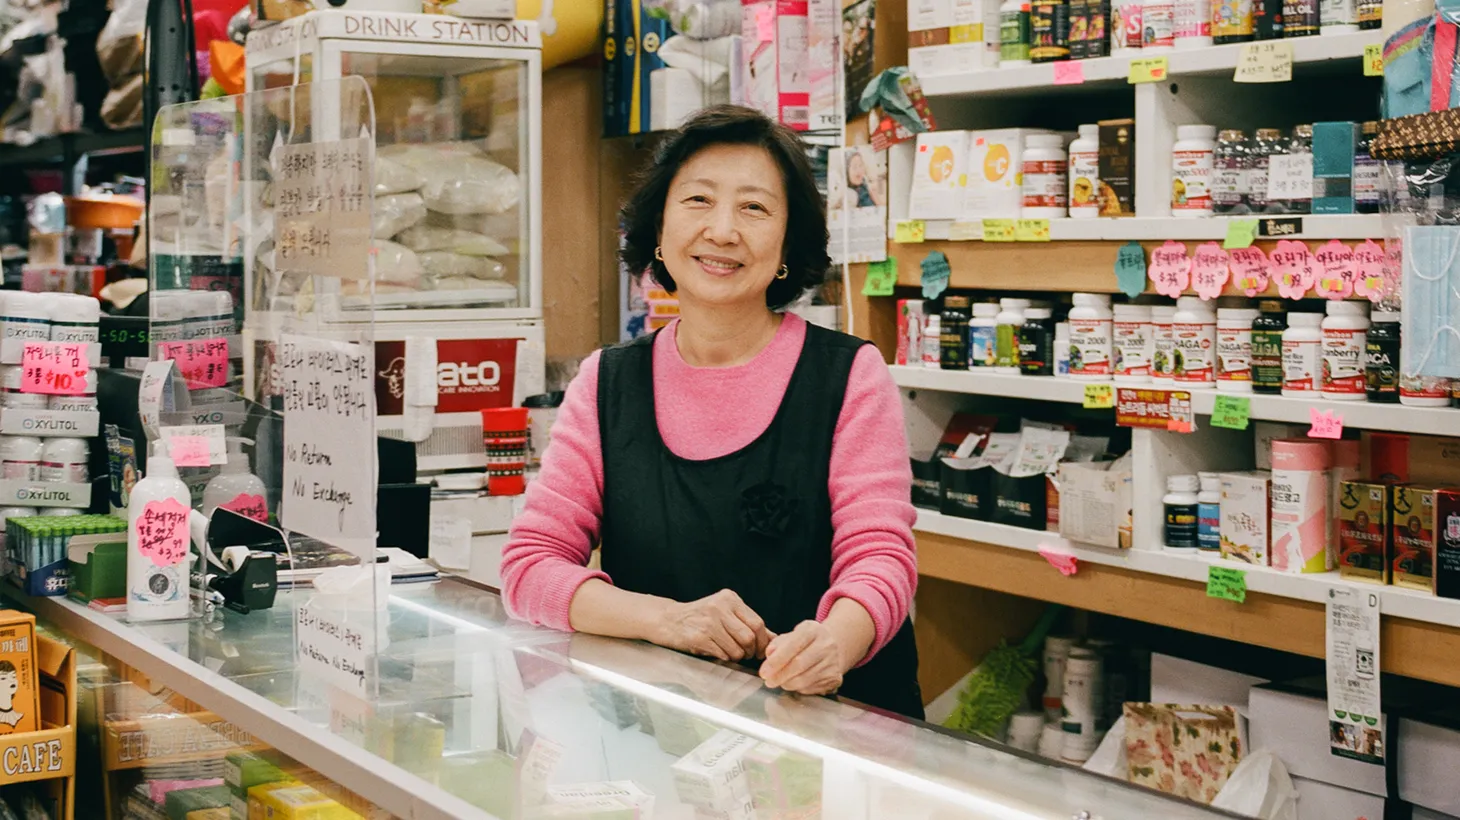 Ms. Jo is the shopkeeper at Home Mart Plus Co. in Koreatown. “I realized that she had bottled up so much inside her [during the COVID-19 pandemic], and there was not really someone that she could talk to,” says photographer Emanuel Hahn. “She just opened up.”